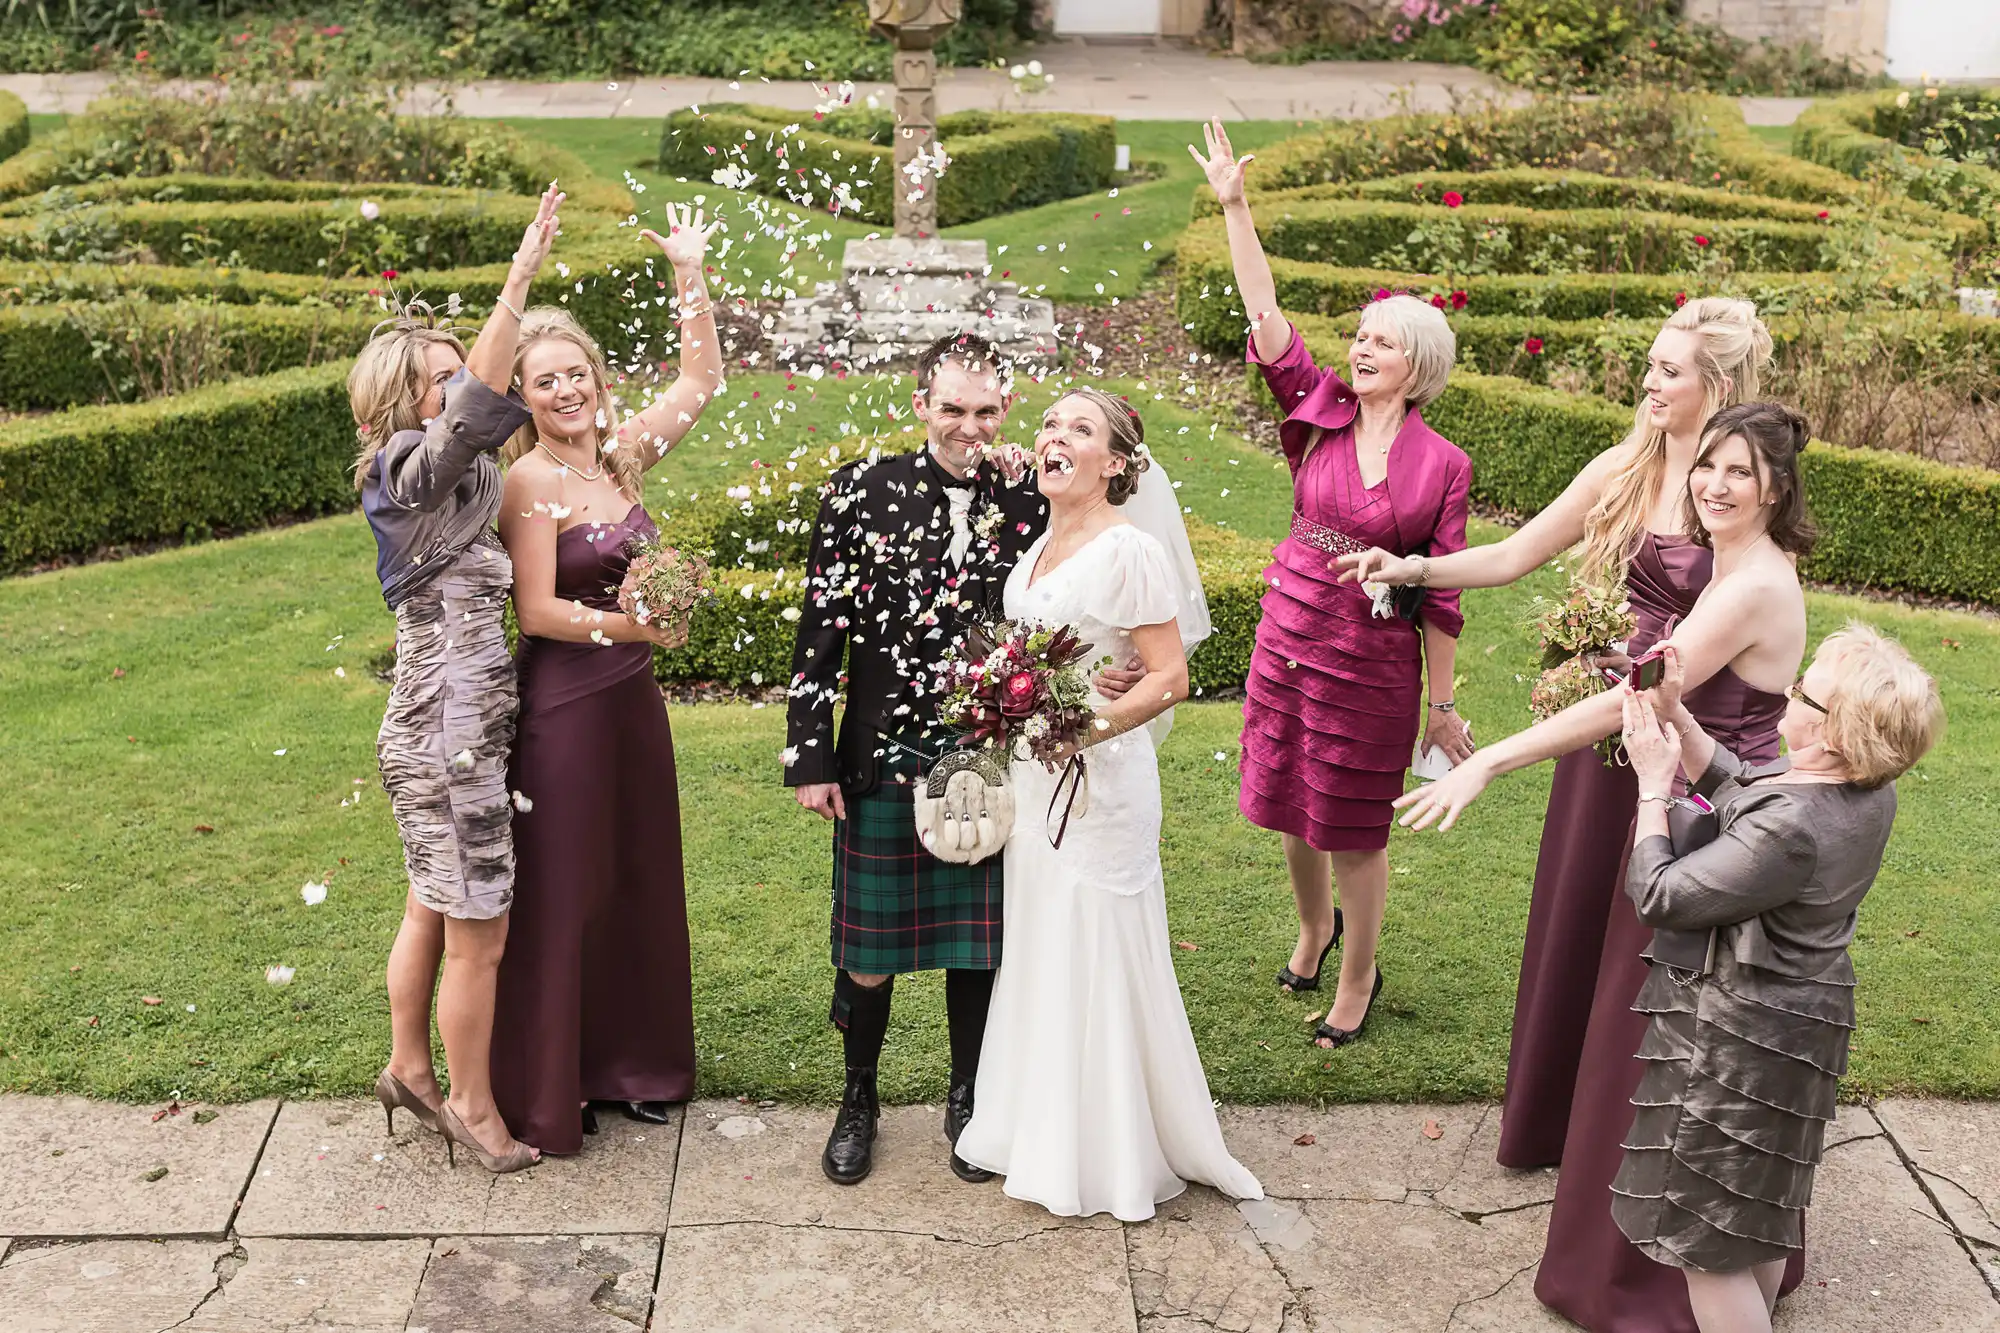 A joyful wedding group celebrates by throwing confetti at the smiling bride and groom in a garden setting.